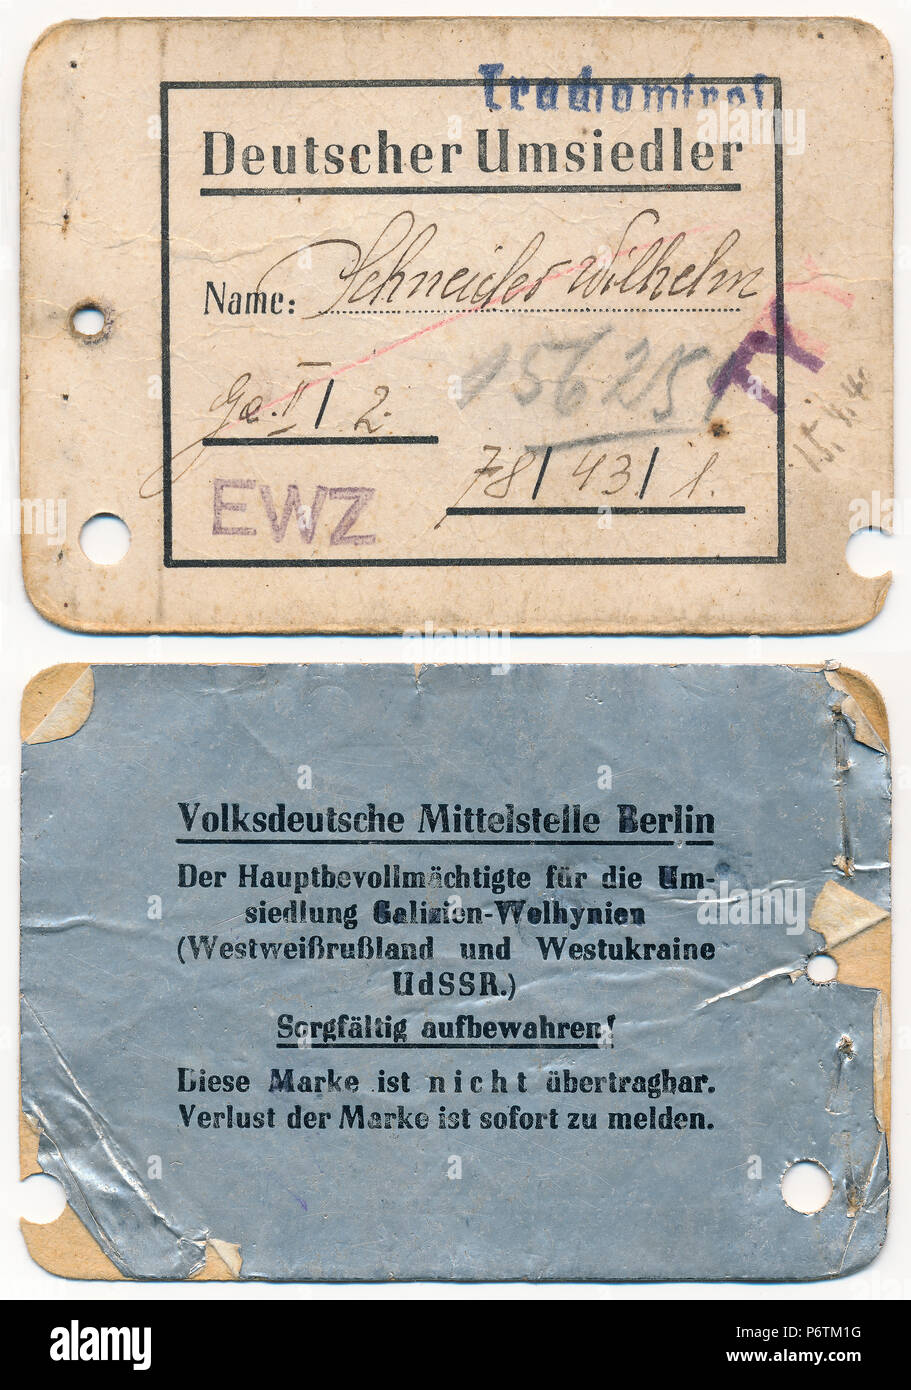 Certificate of Nationality, 1940, Third Reich / Nazi Germany Period Stock Photo